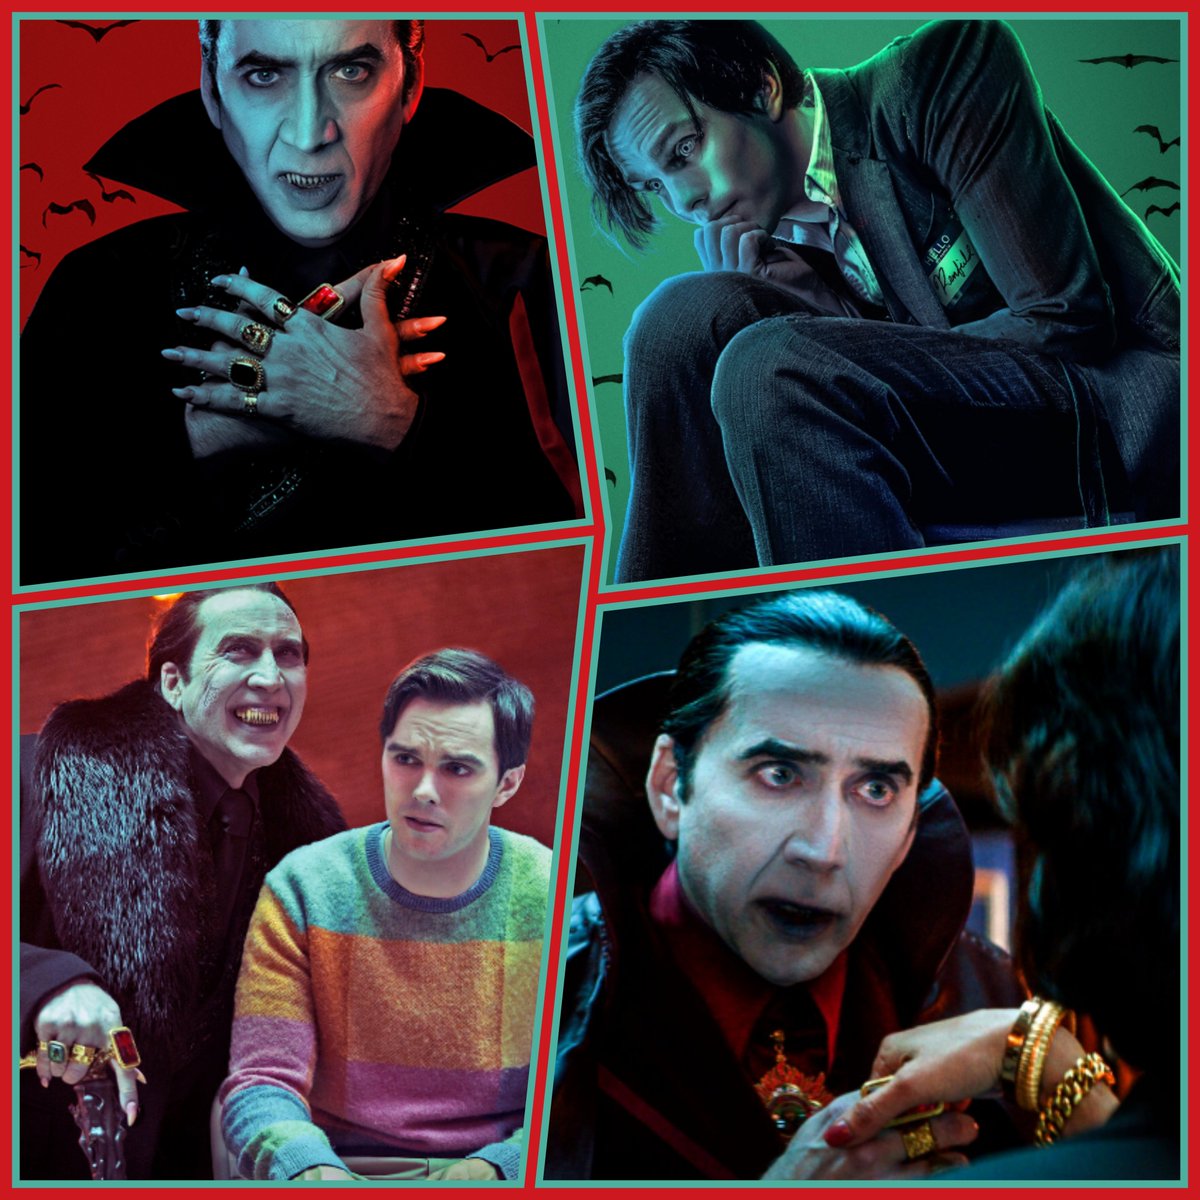 Renfield is horror-comedy done right. 
The film moves at a welcome brisk pace and is both funny & surprisingly bloody / gory.
Nicholas Holt is great as Renfield & Nicolas Cage is a delight as Dracula. 🧛‍♂️🦇
#RenfieldMovie #HorrorCommunity #FilmTwitter
#Dracula